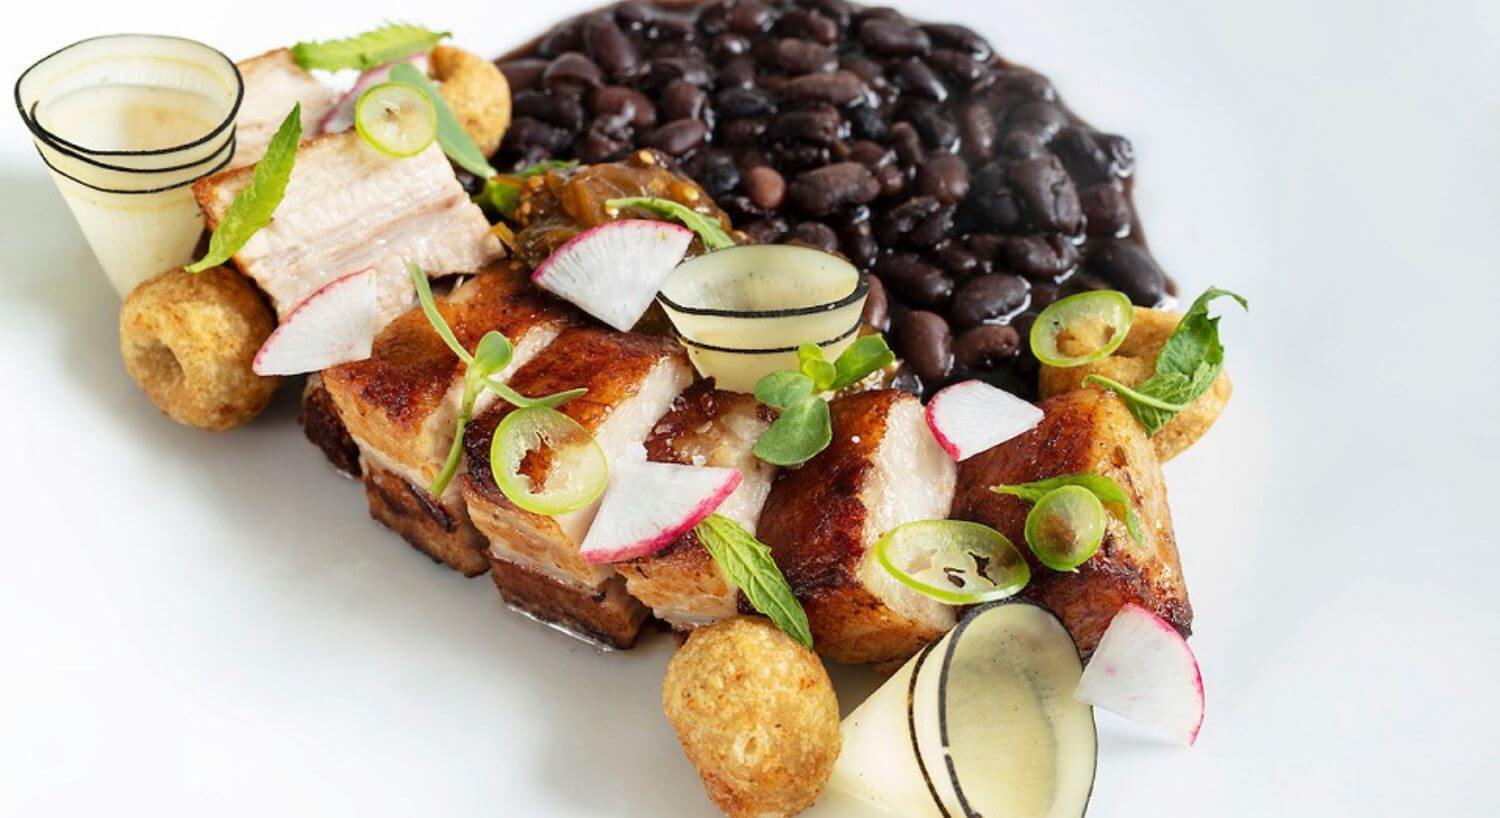 A white plate with black beans, fried pork belly pieces, and garnished with pieces of fresh sliced vegetables.